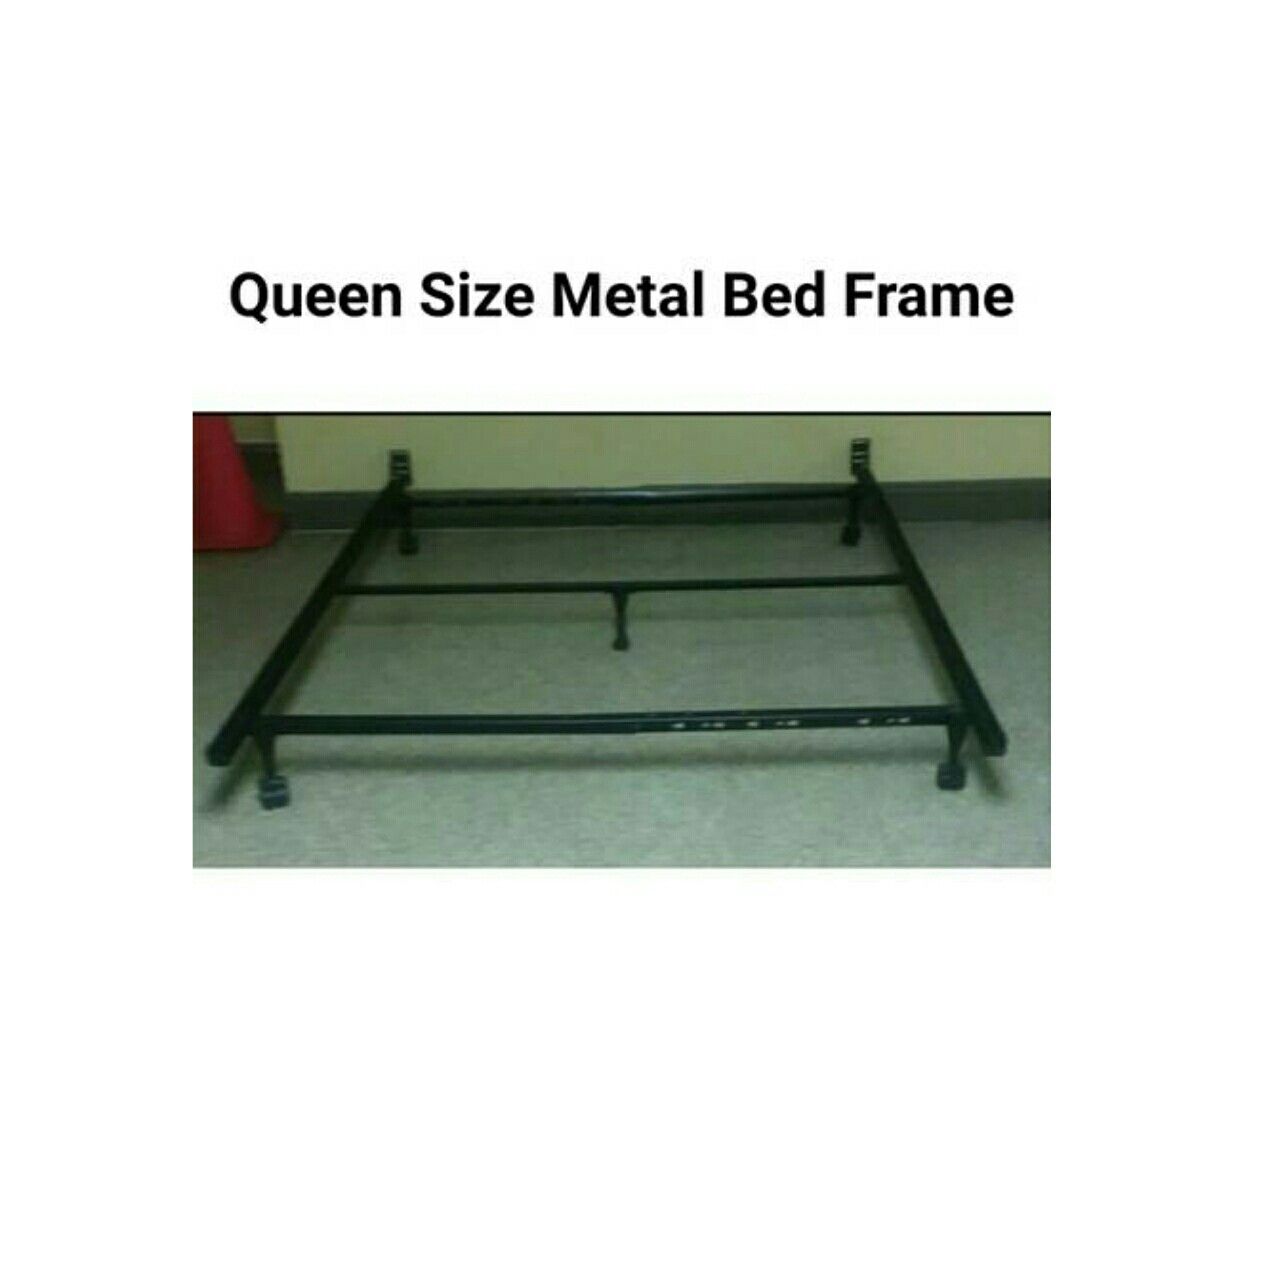 Queen Size Metal Bed Frame with Wheels